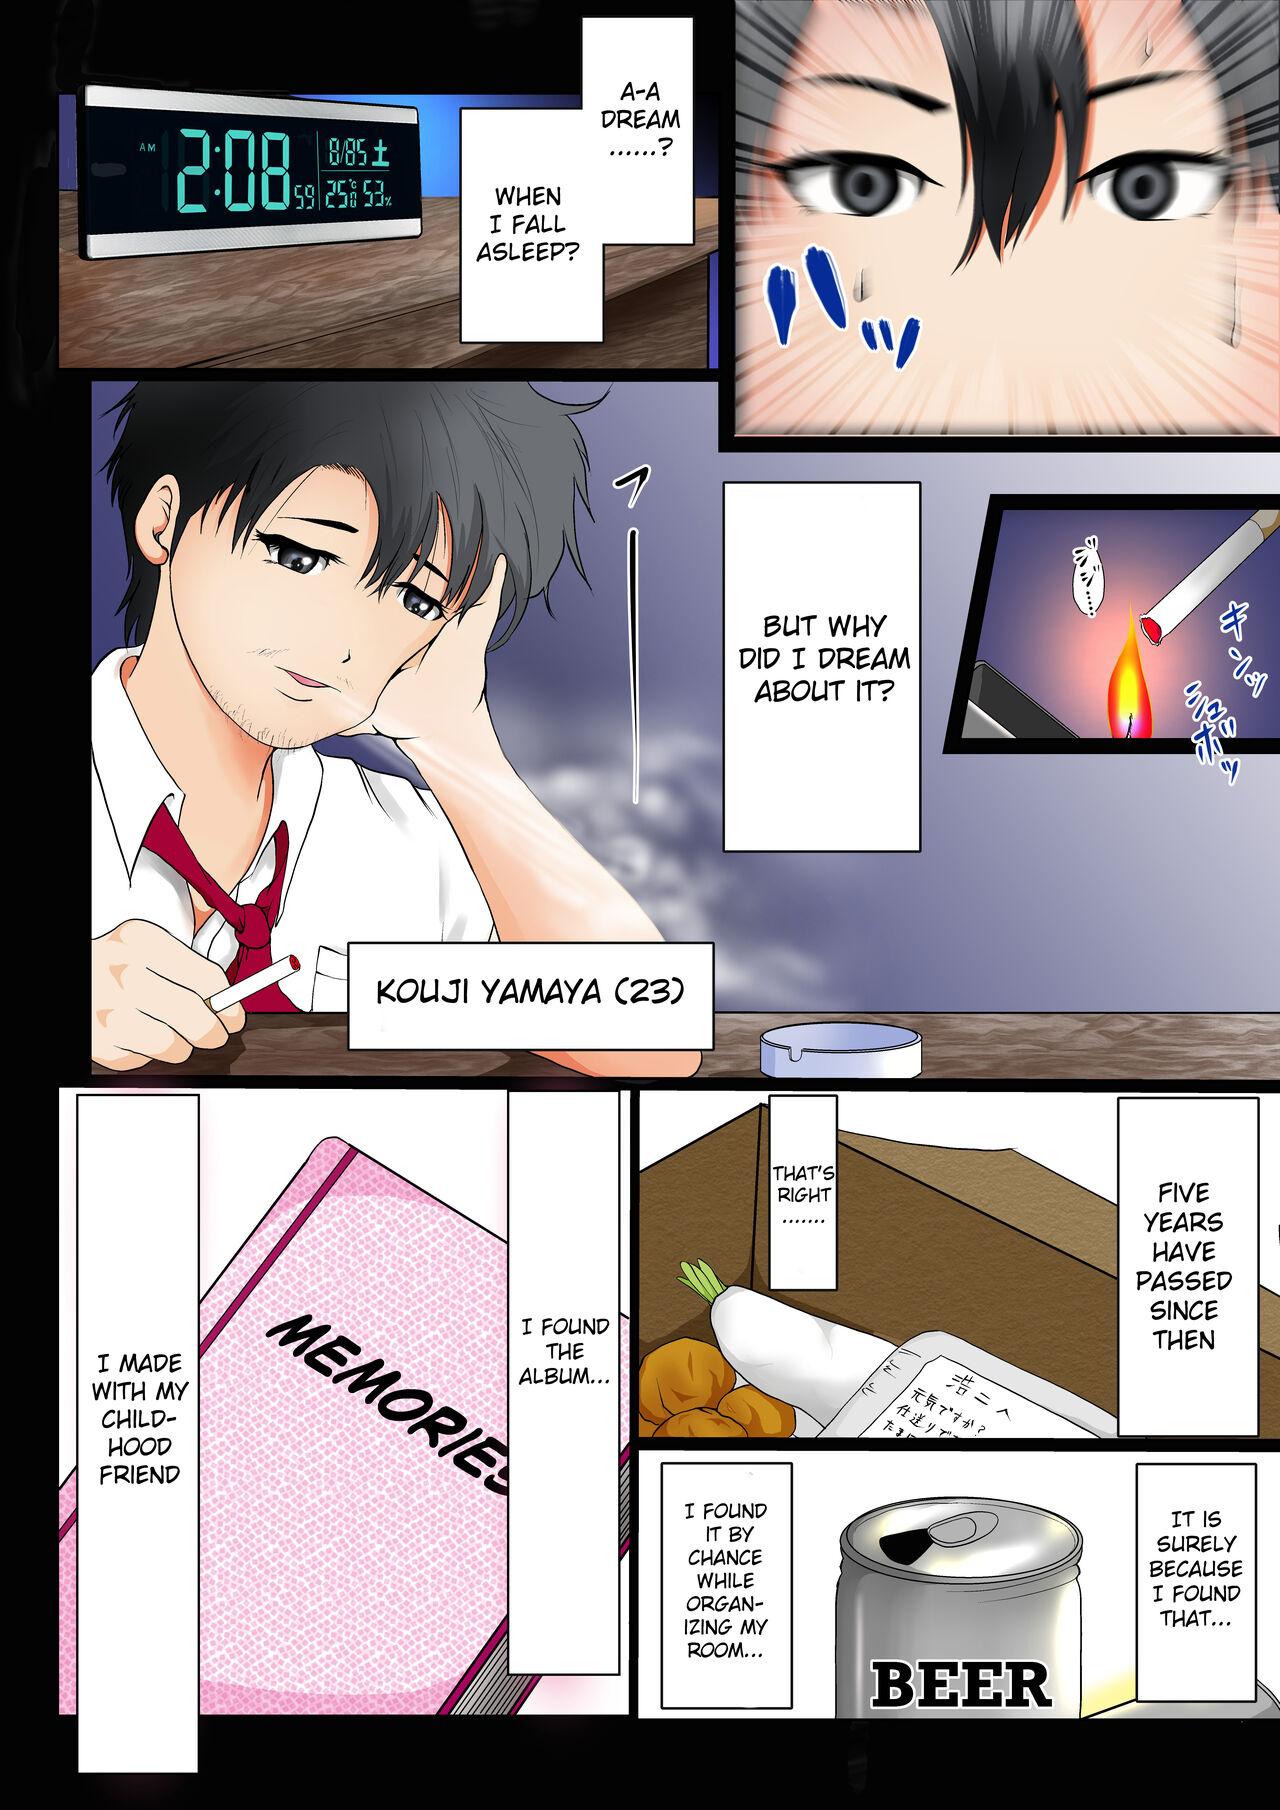 Yanks Featured The reason why the bond with my childhood friend is broken so easily - Original Tanned - Page 5